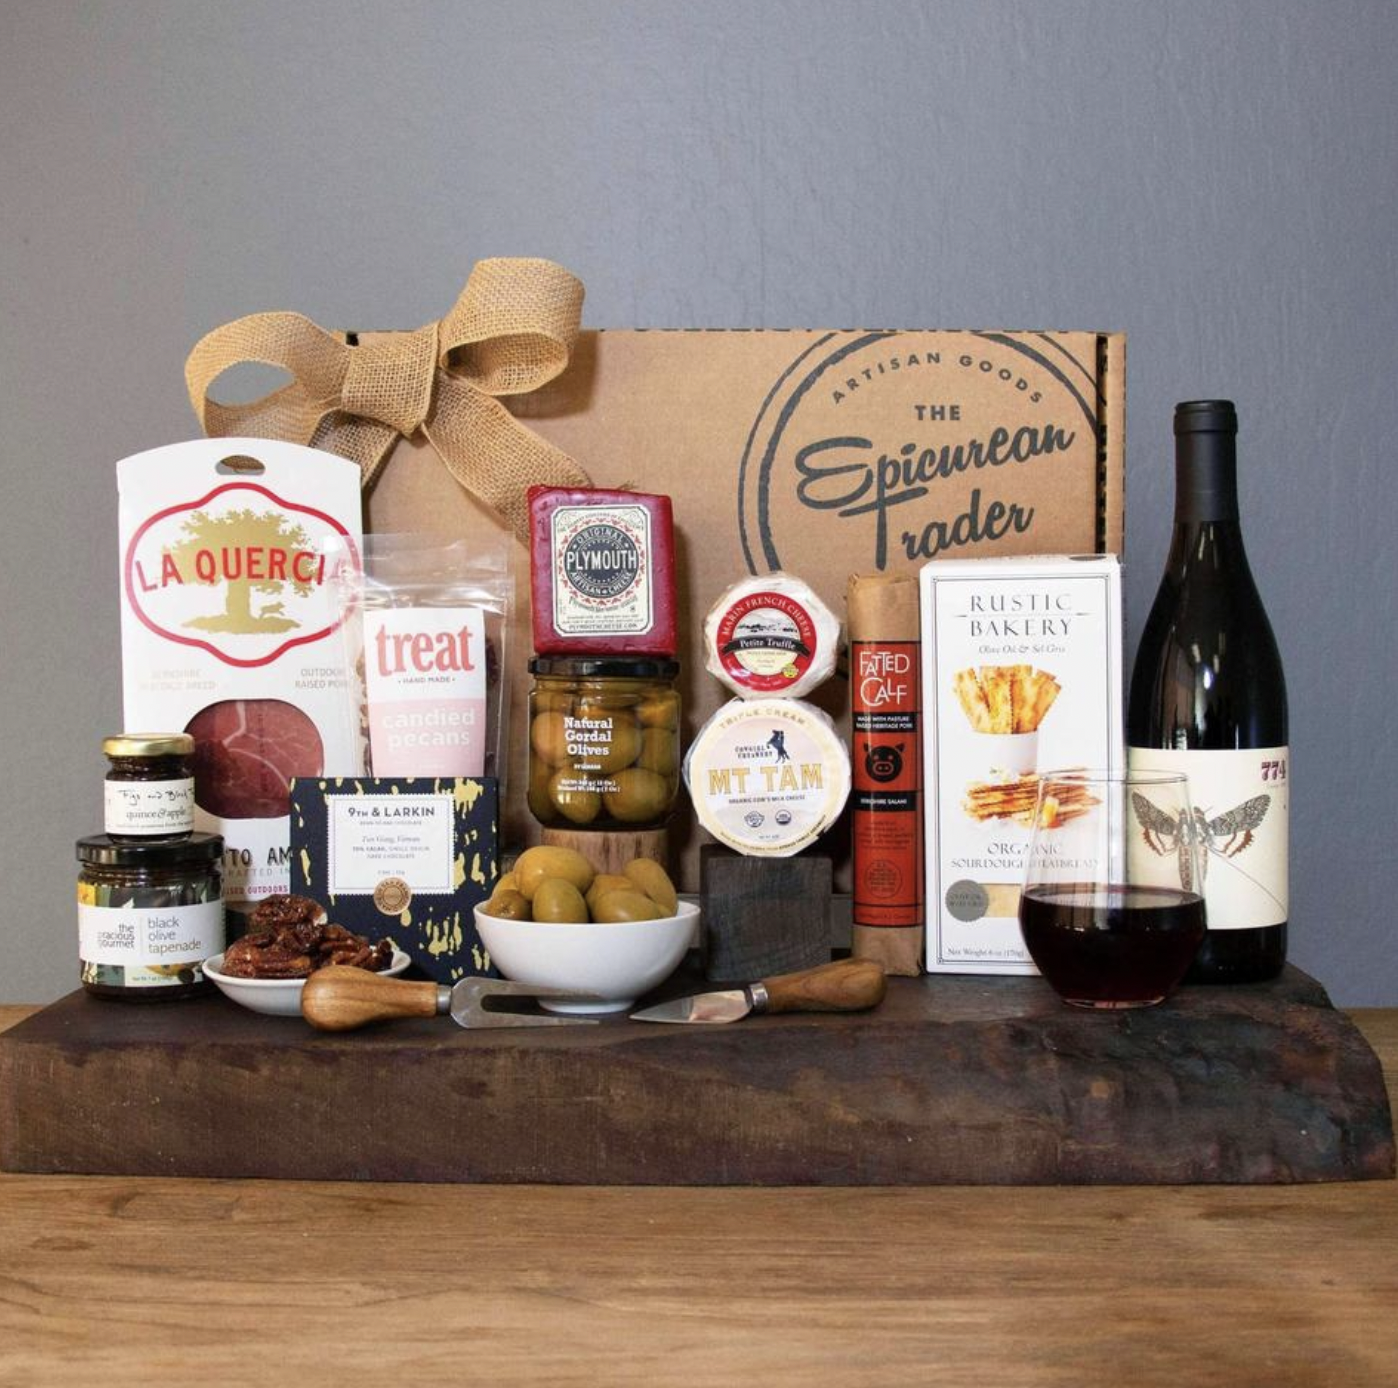 Wine, Cheese and Charcuterie Deluxe Gift Box from San Francisco's The Epicurean Trader Image